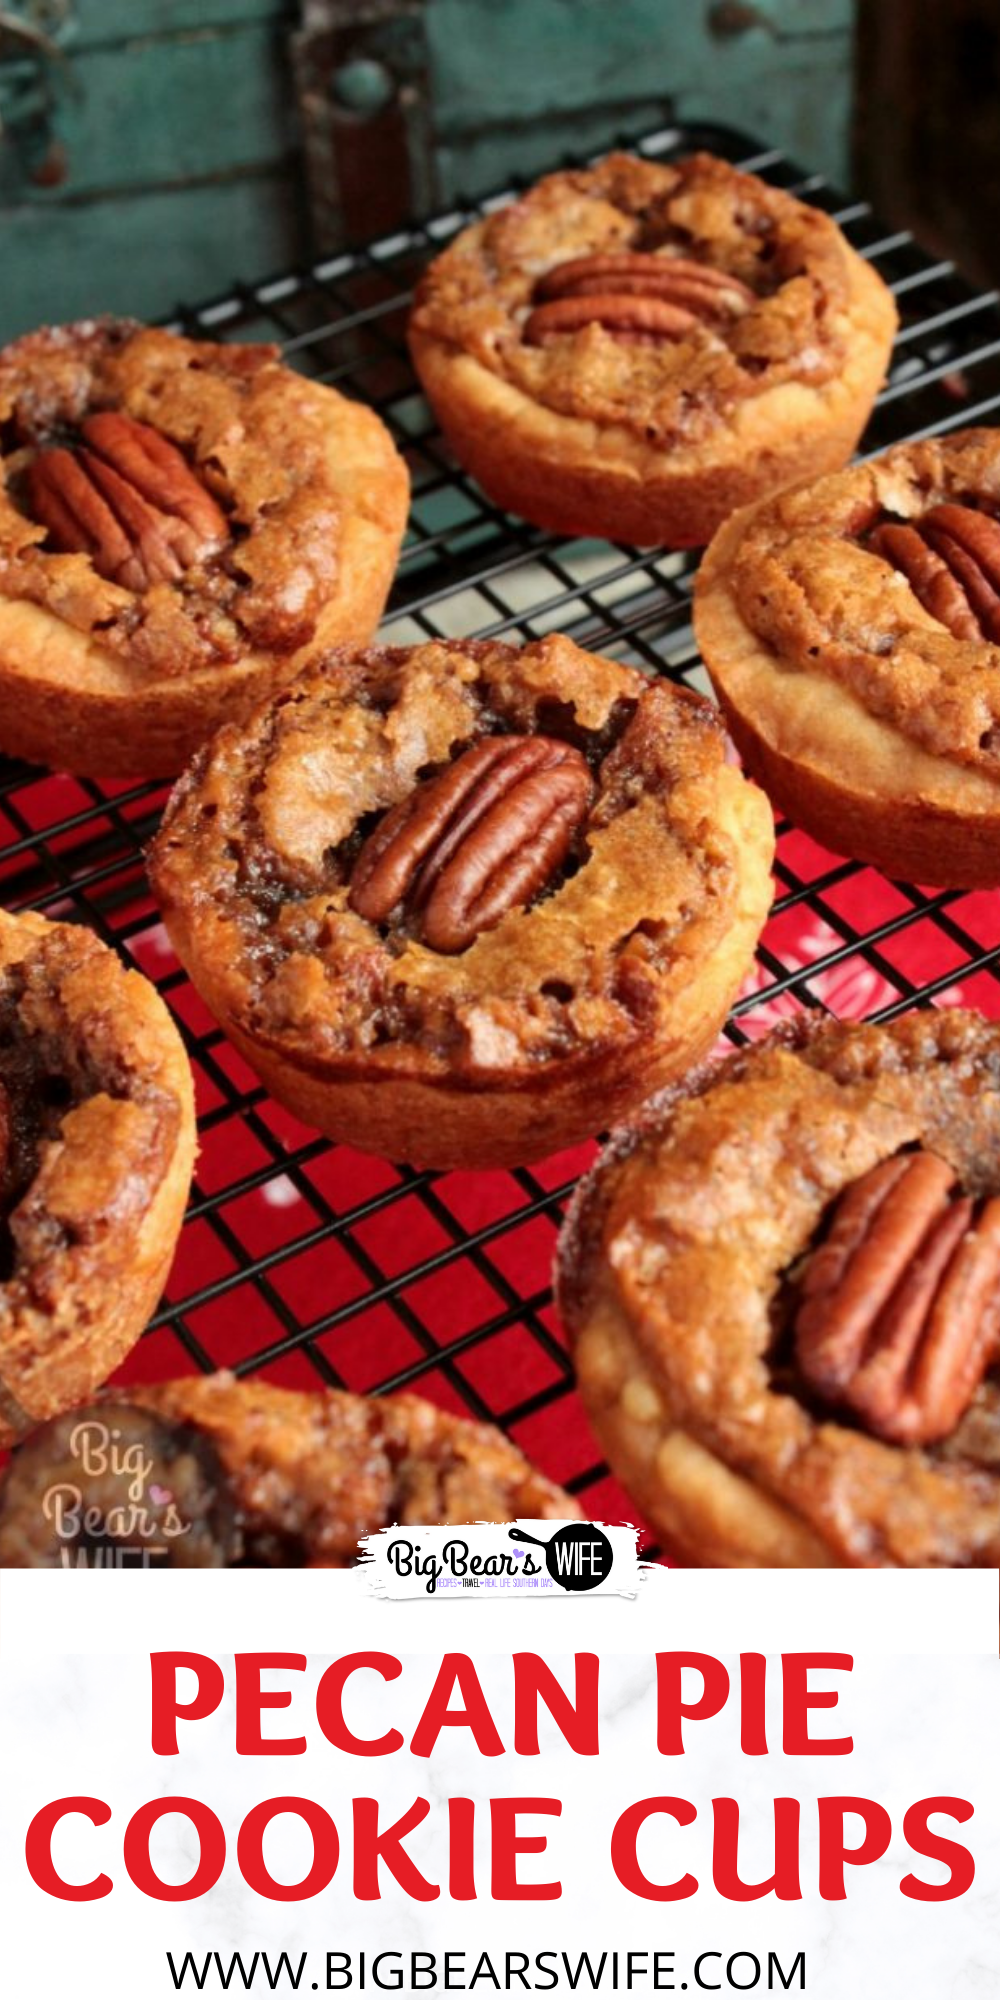 These Pecan Pie Cookie Cups have a sweet pecan pie filling baked inside of a sugar cookie crust to create the perfect mini pecan pie dessert for your next holiday party! via @bigbearswife